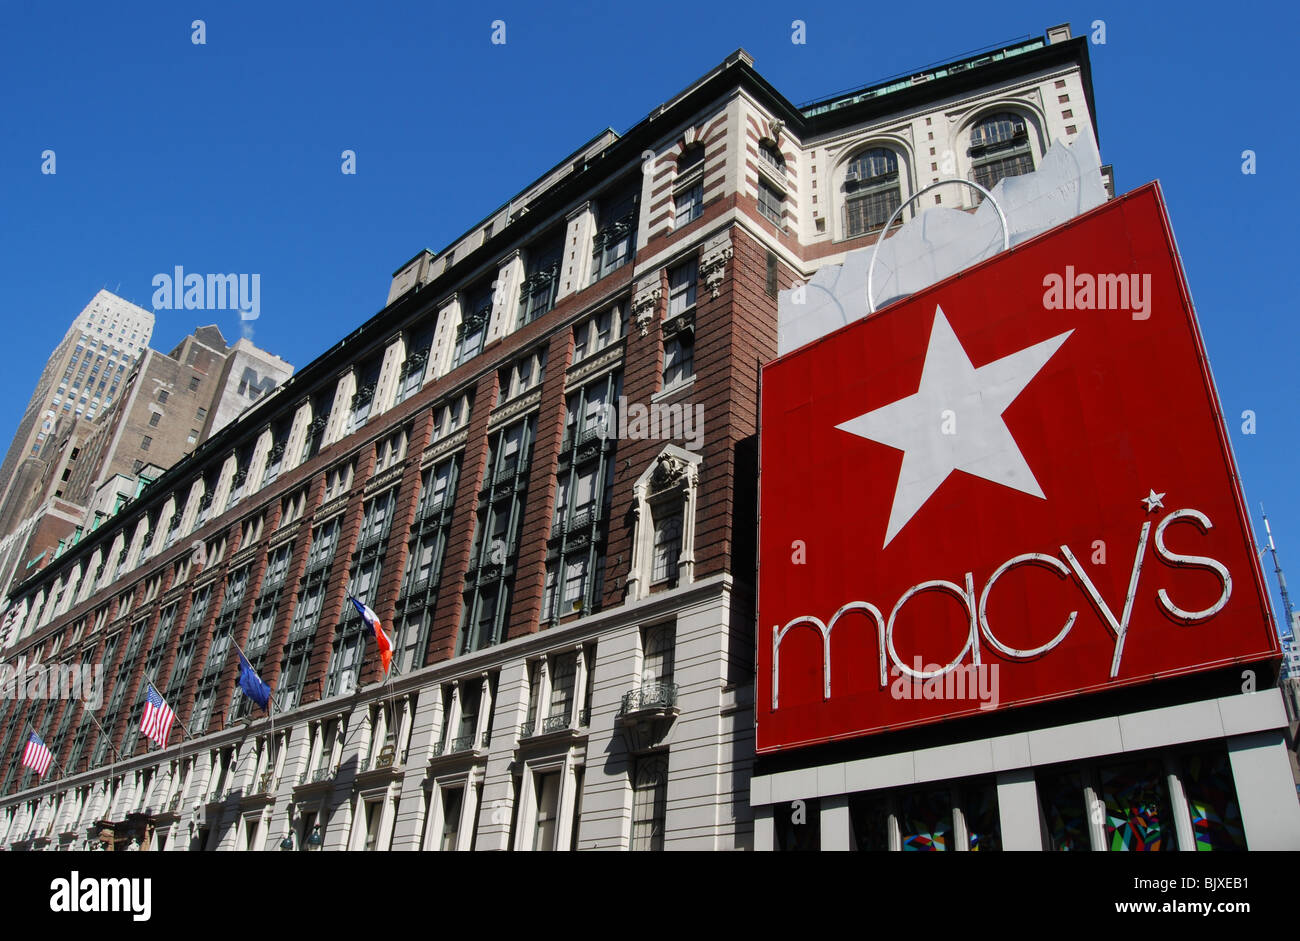 Macy's in New York - One of the Oldest Department Store Chains in